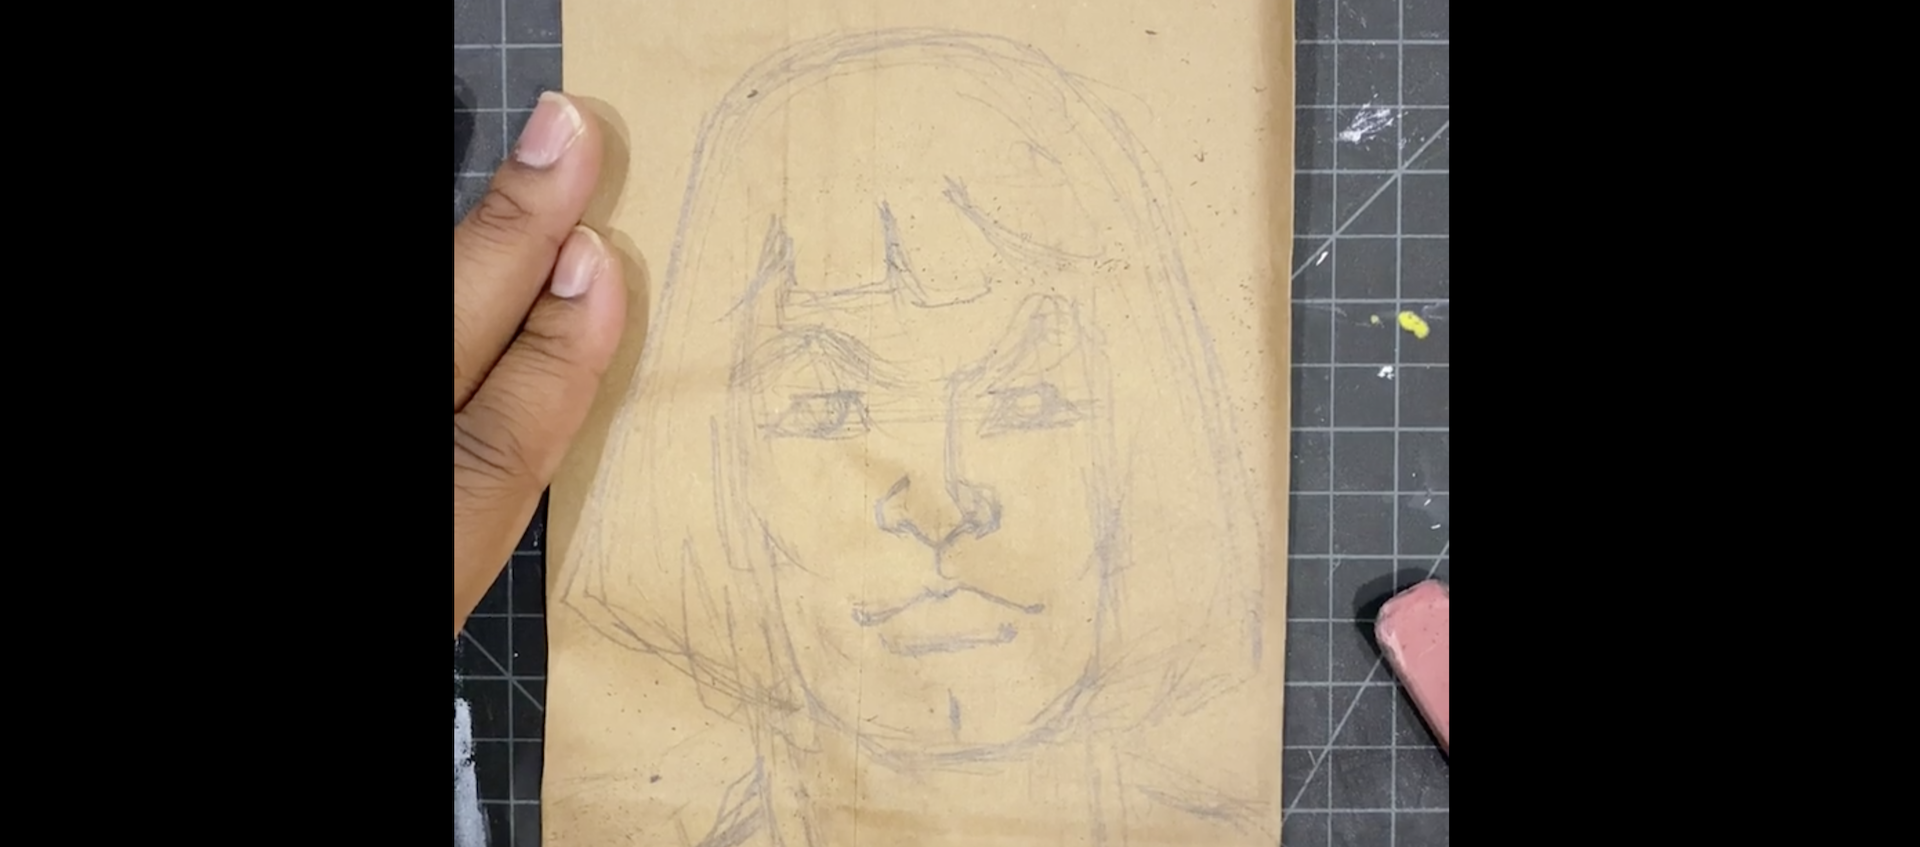 A pencil sketch of He-Man on a drawing board, held down on the left by two fingers of the artist, Alexander Chisley